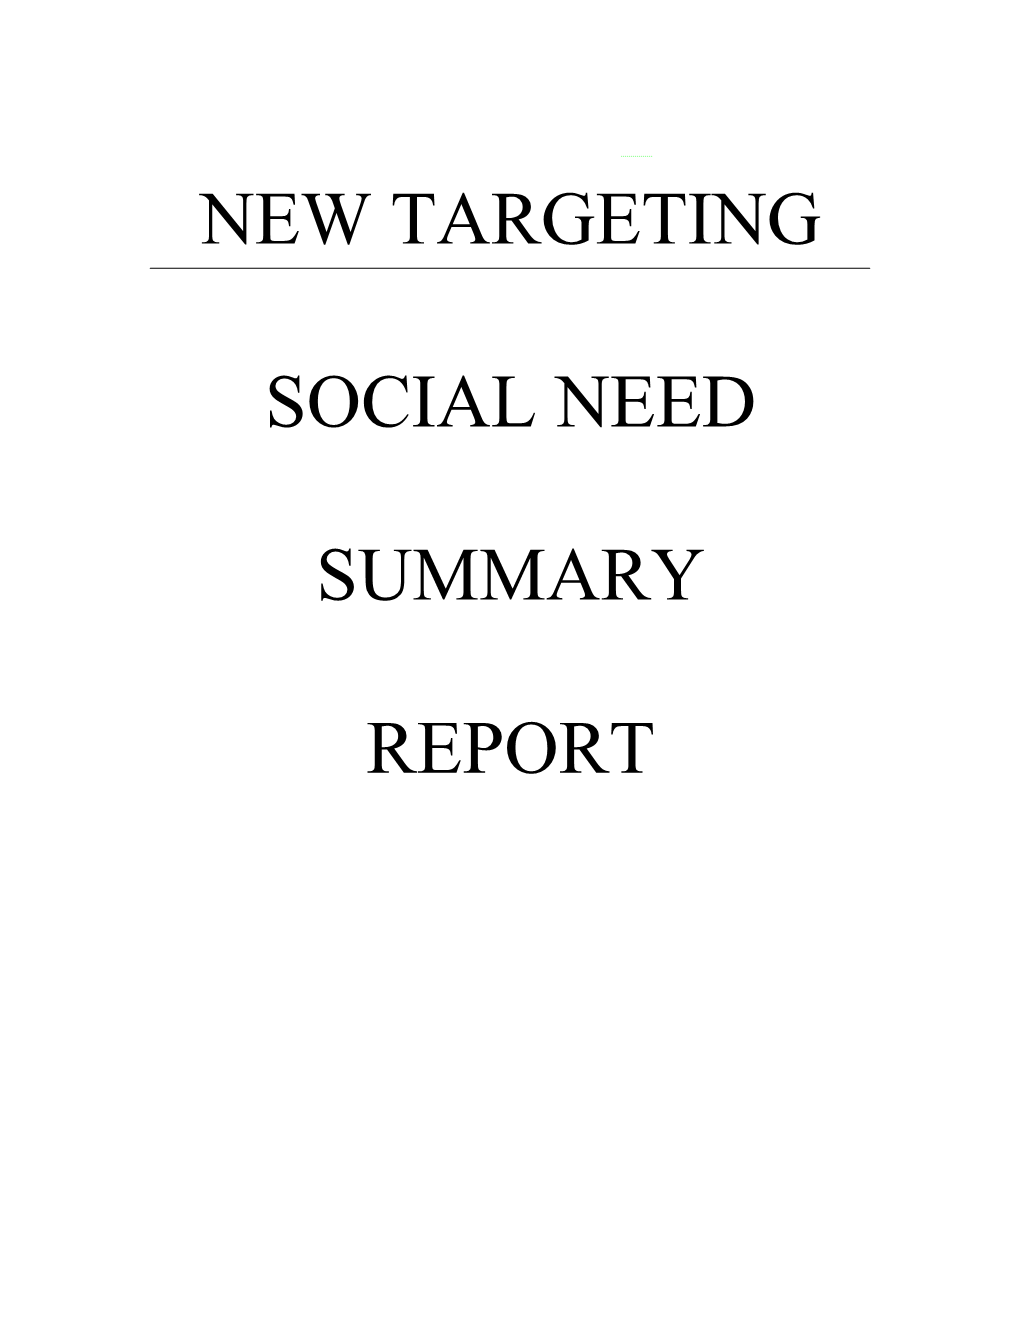 New Targeting Social Need Summary Report